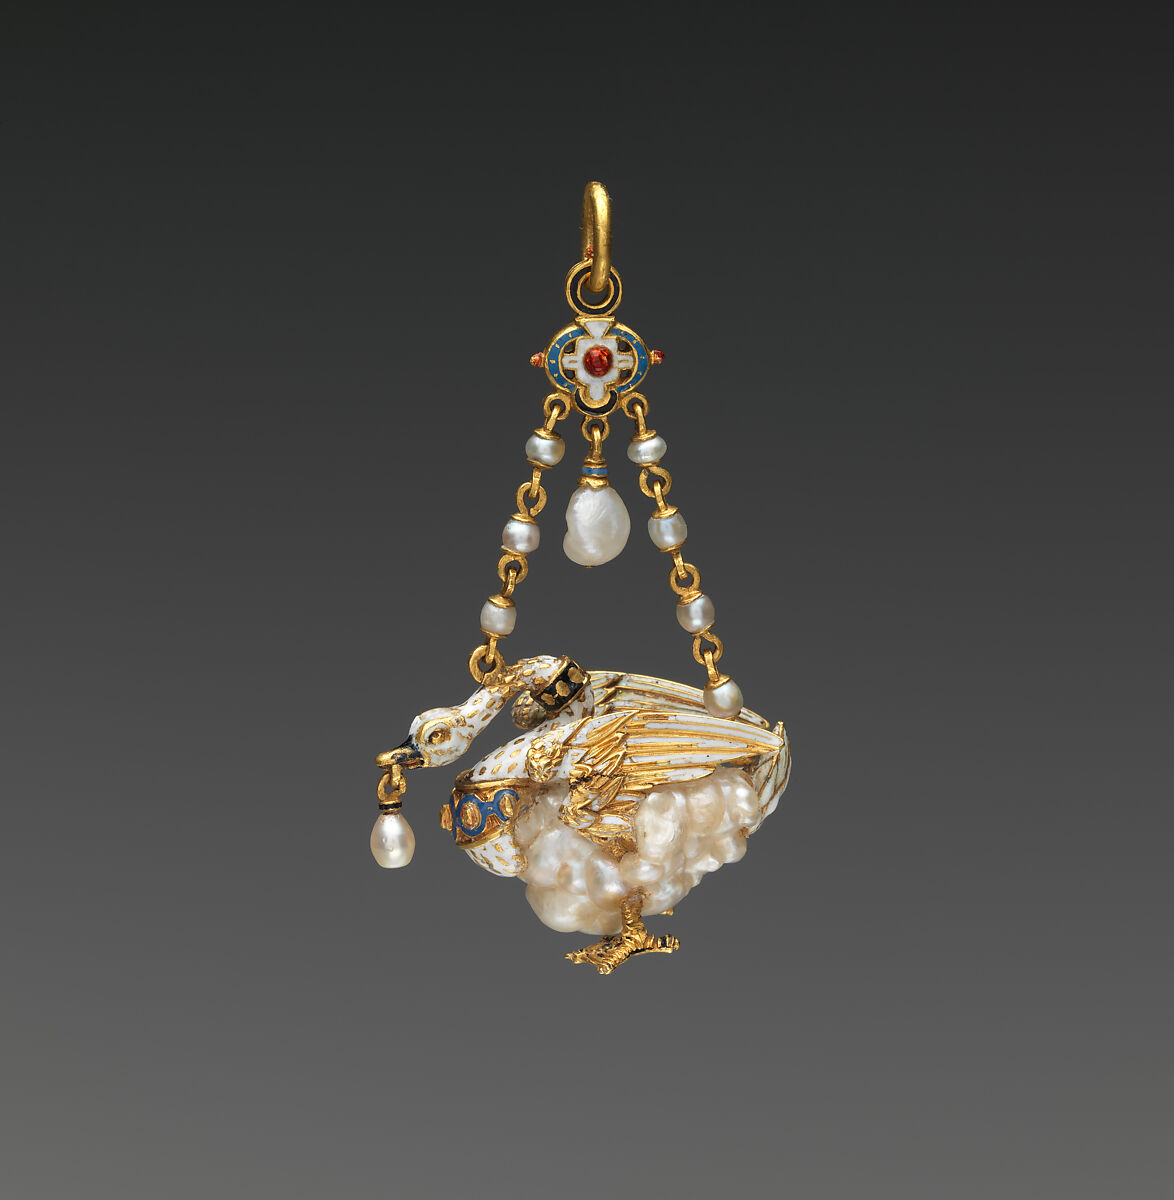 Pendant in the form of a swan, Gold, partly enameled; pearls